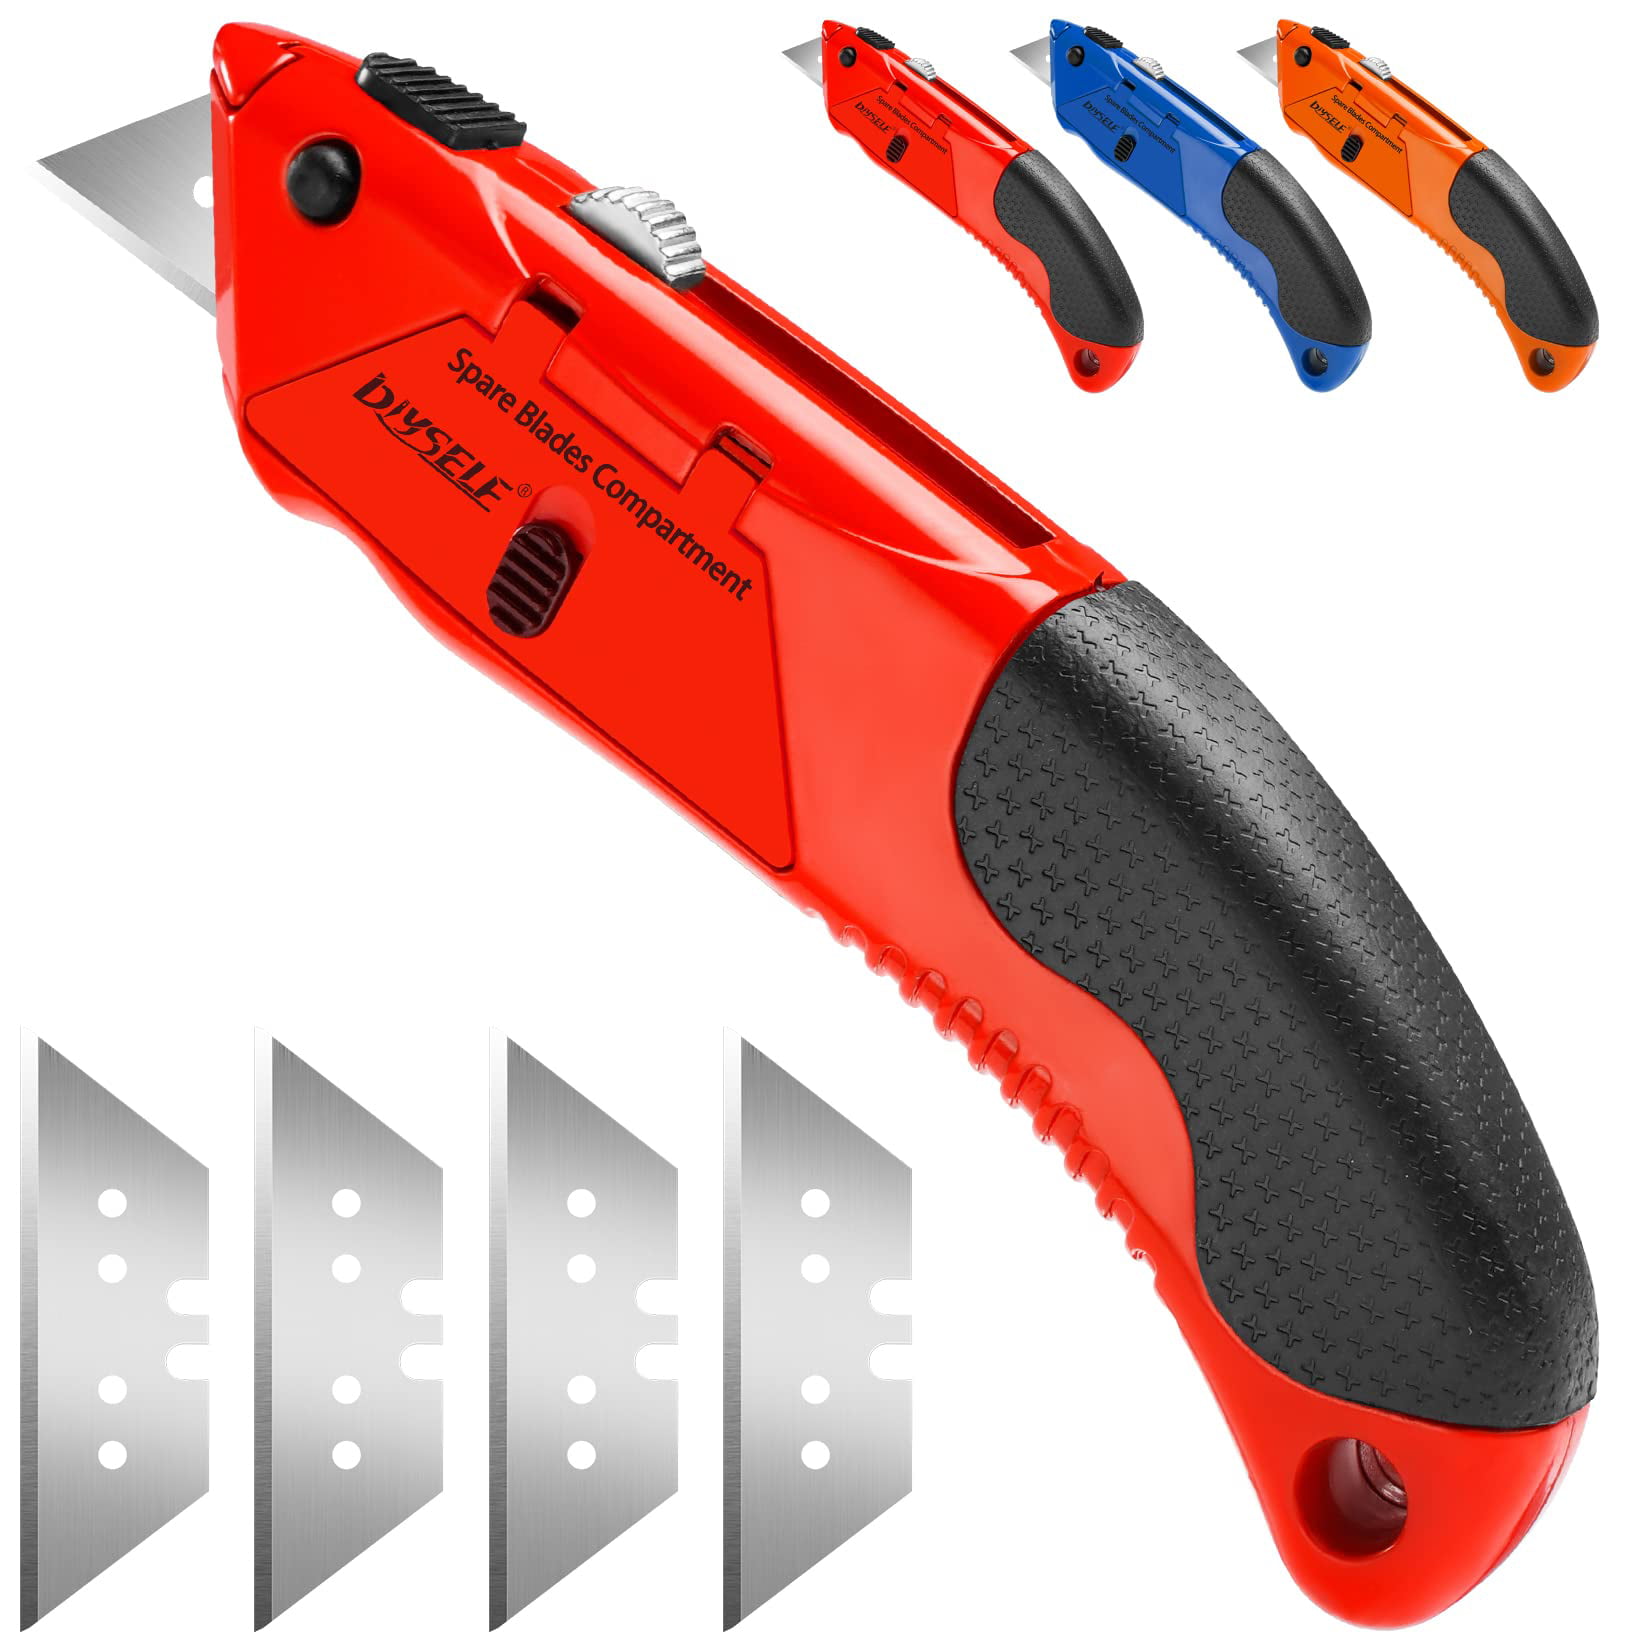 DIYSELF 4 Pack Box Cutter, Box Cutter Retractable for Cardboard, Papers and  Plastics. 18mm and 9mm Utility Knife, Razor Knife, Portable Utility Knives